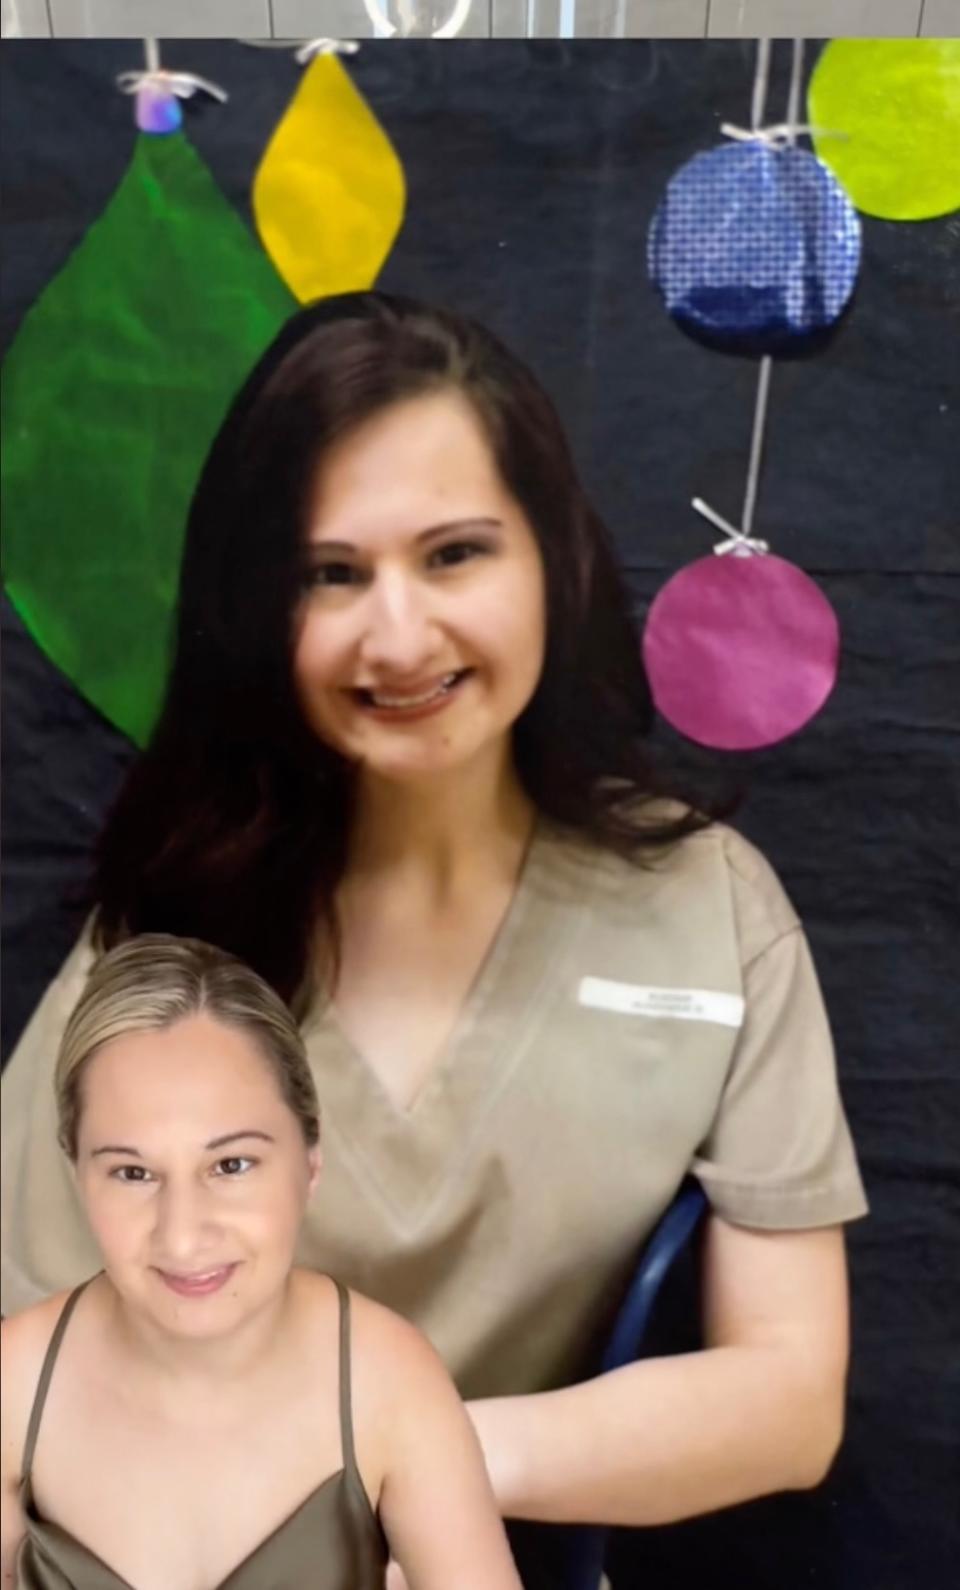 Gypsy Rose Blanchard Says If She Wants More Plastic Surgery